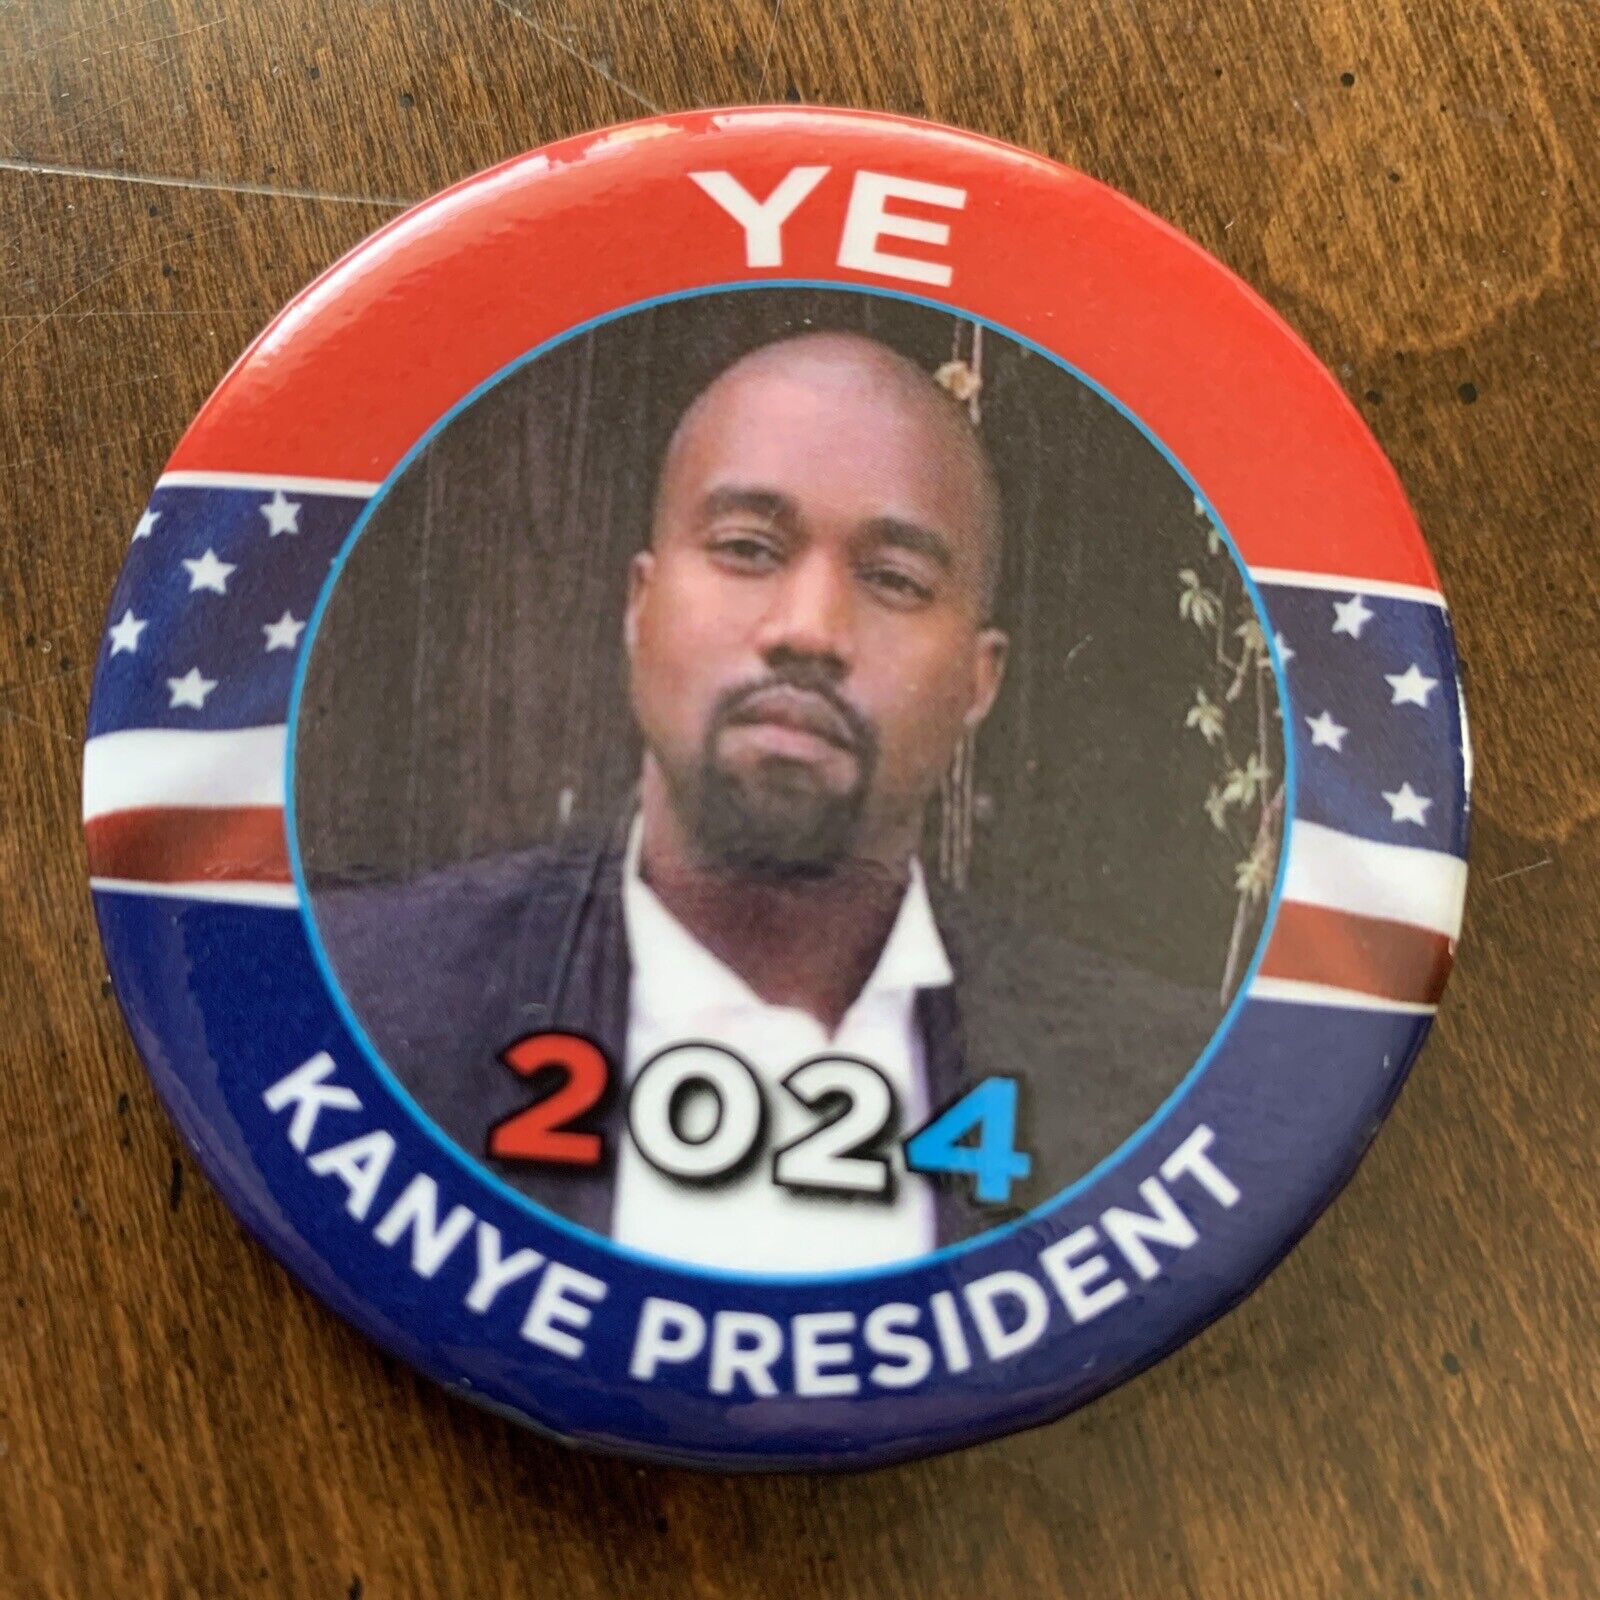  Kanye West YE 2024 Presidential Campaign Pinback Button